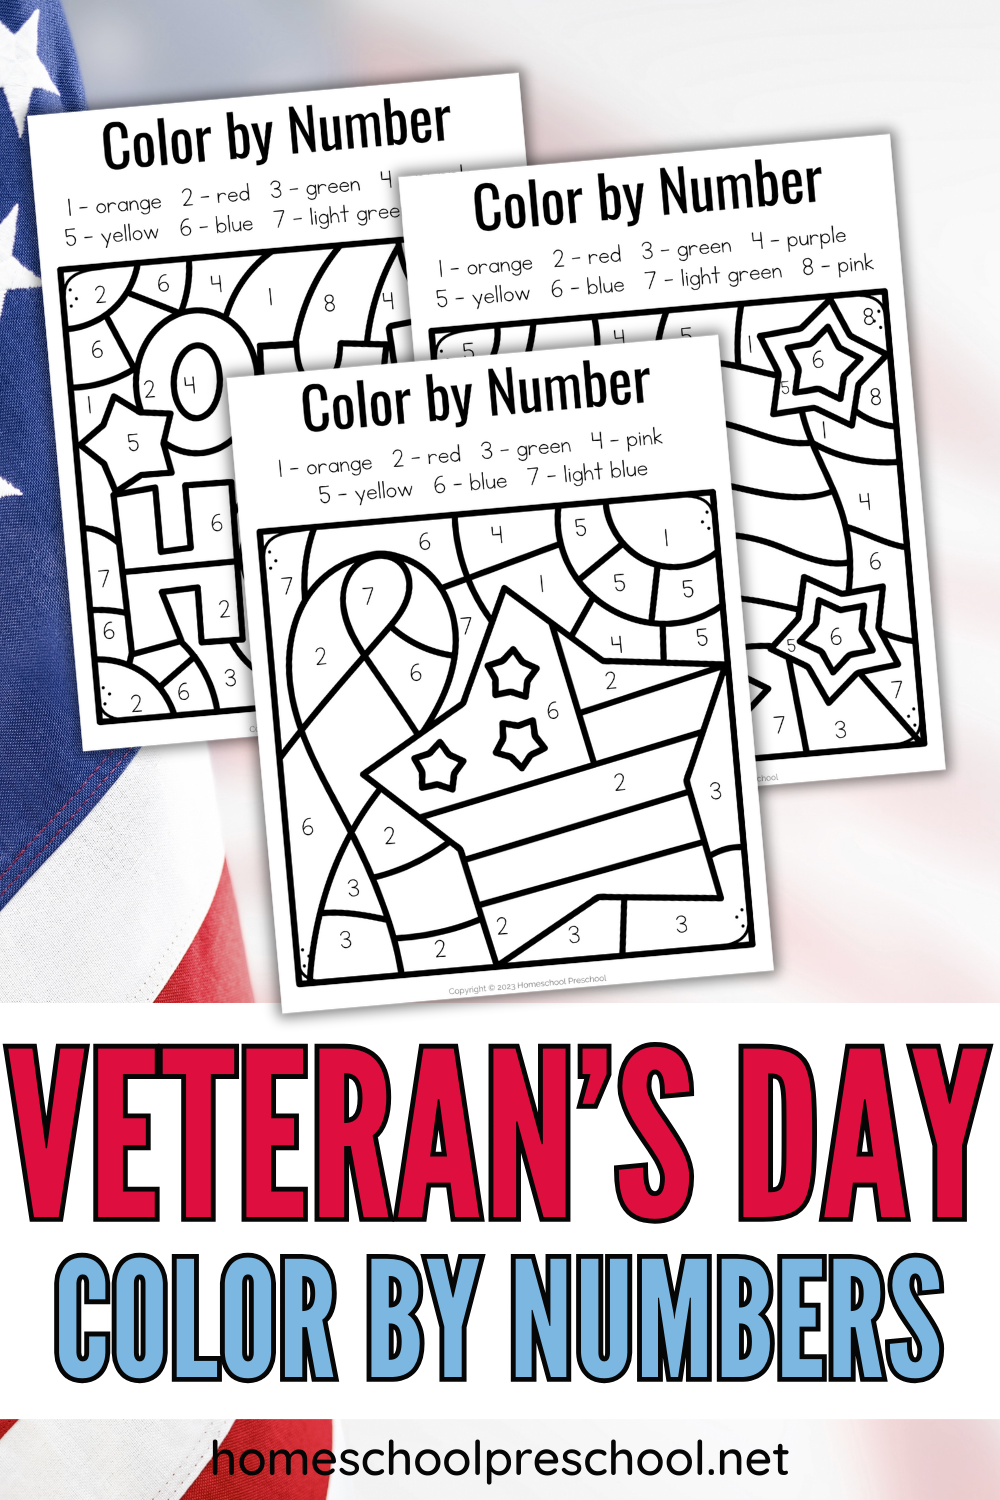 veterans-day-activities-for-students Veteran's Day Color by Number